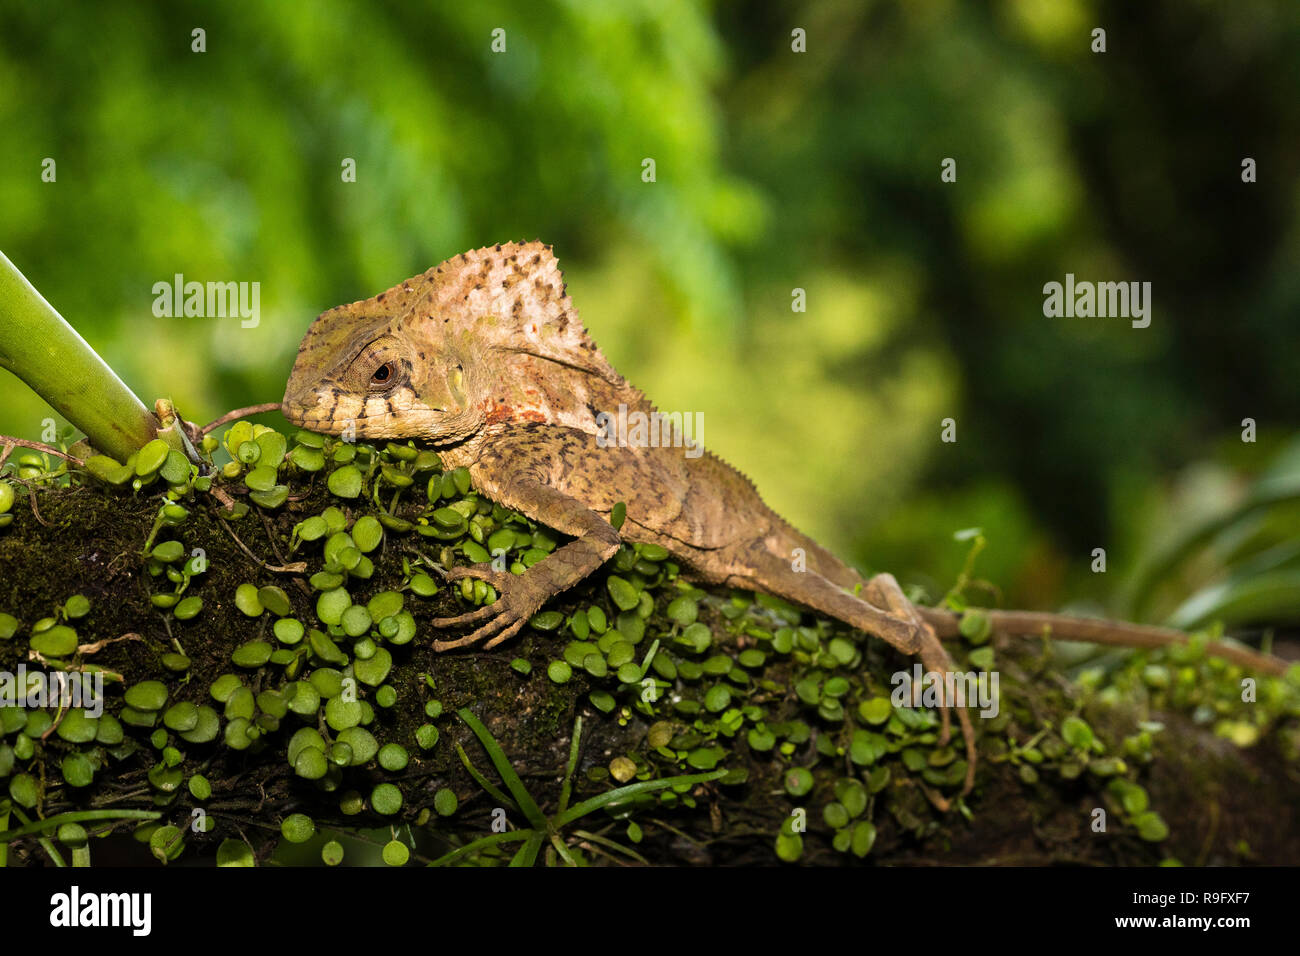 Helmeted basilisk lizard in the Arenal area of Costa Rica Stock Photo